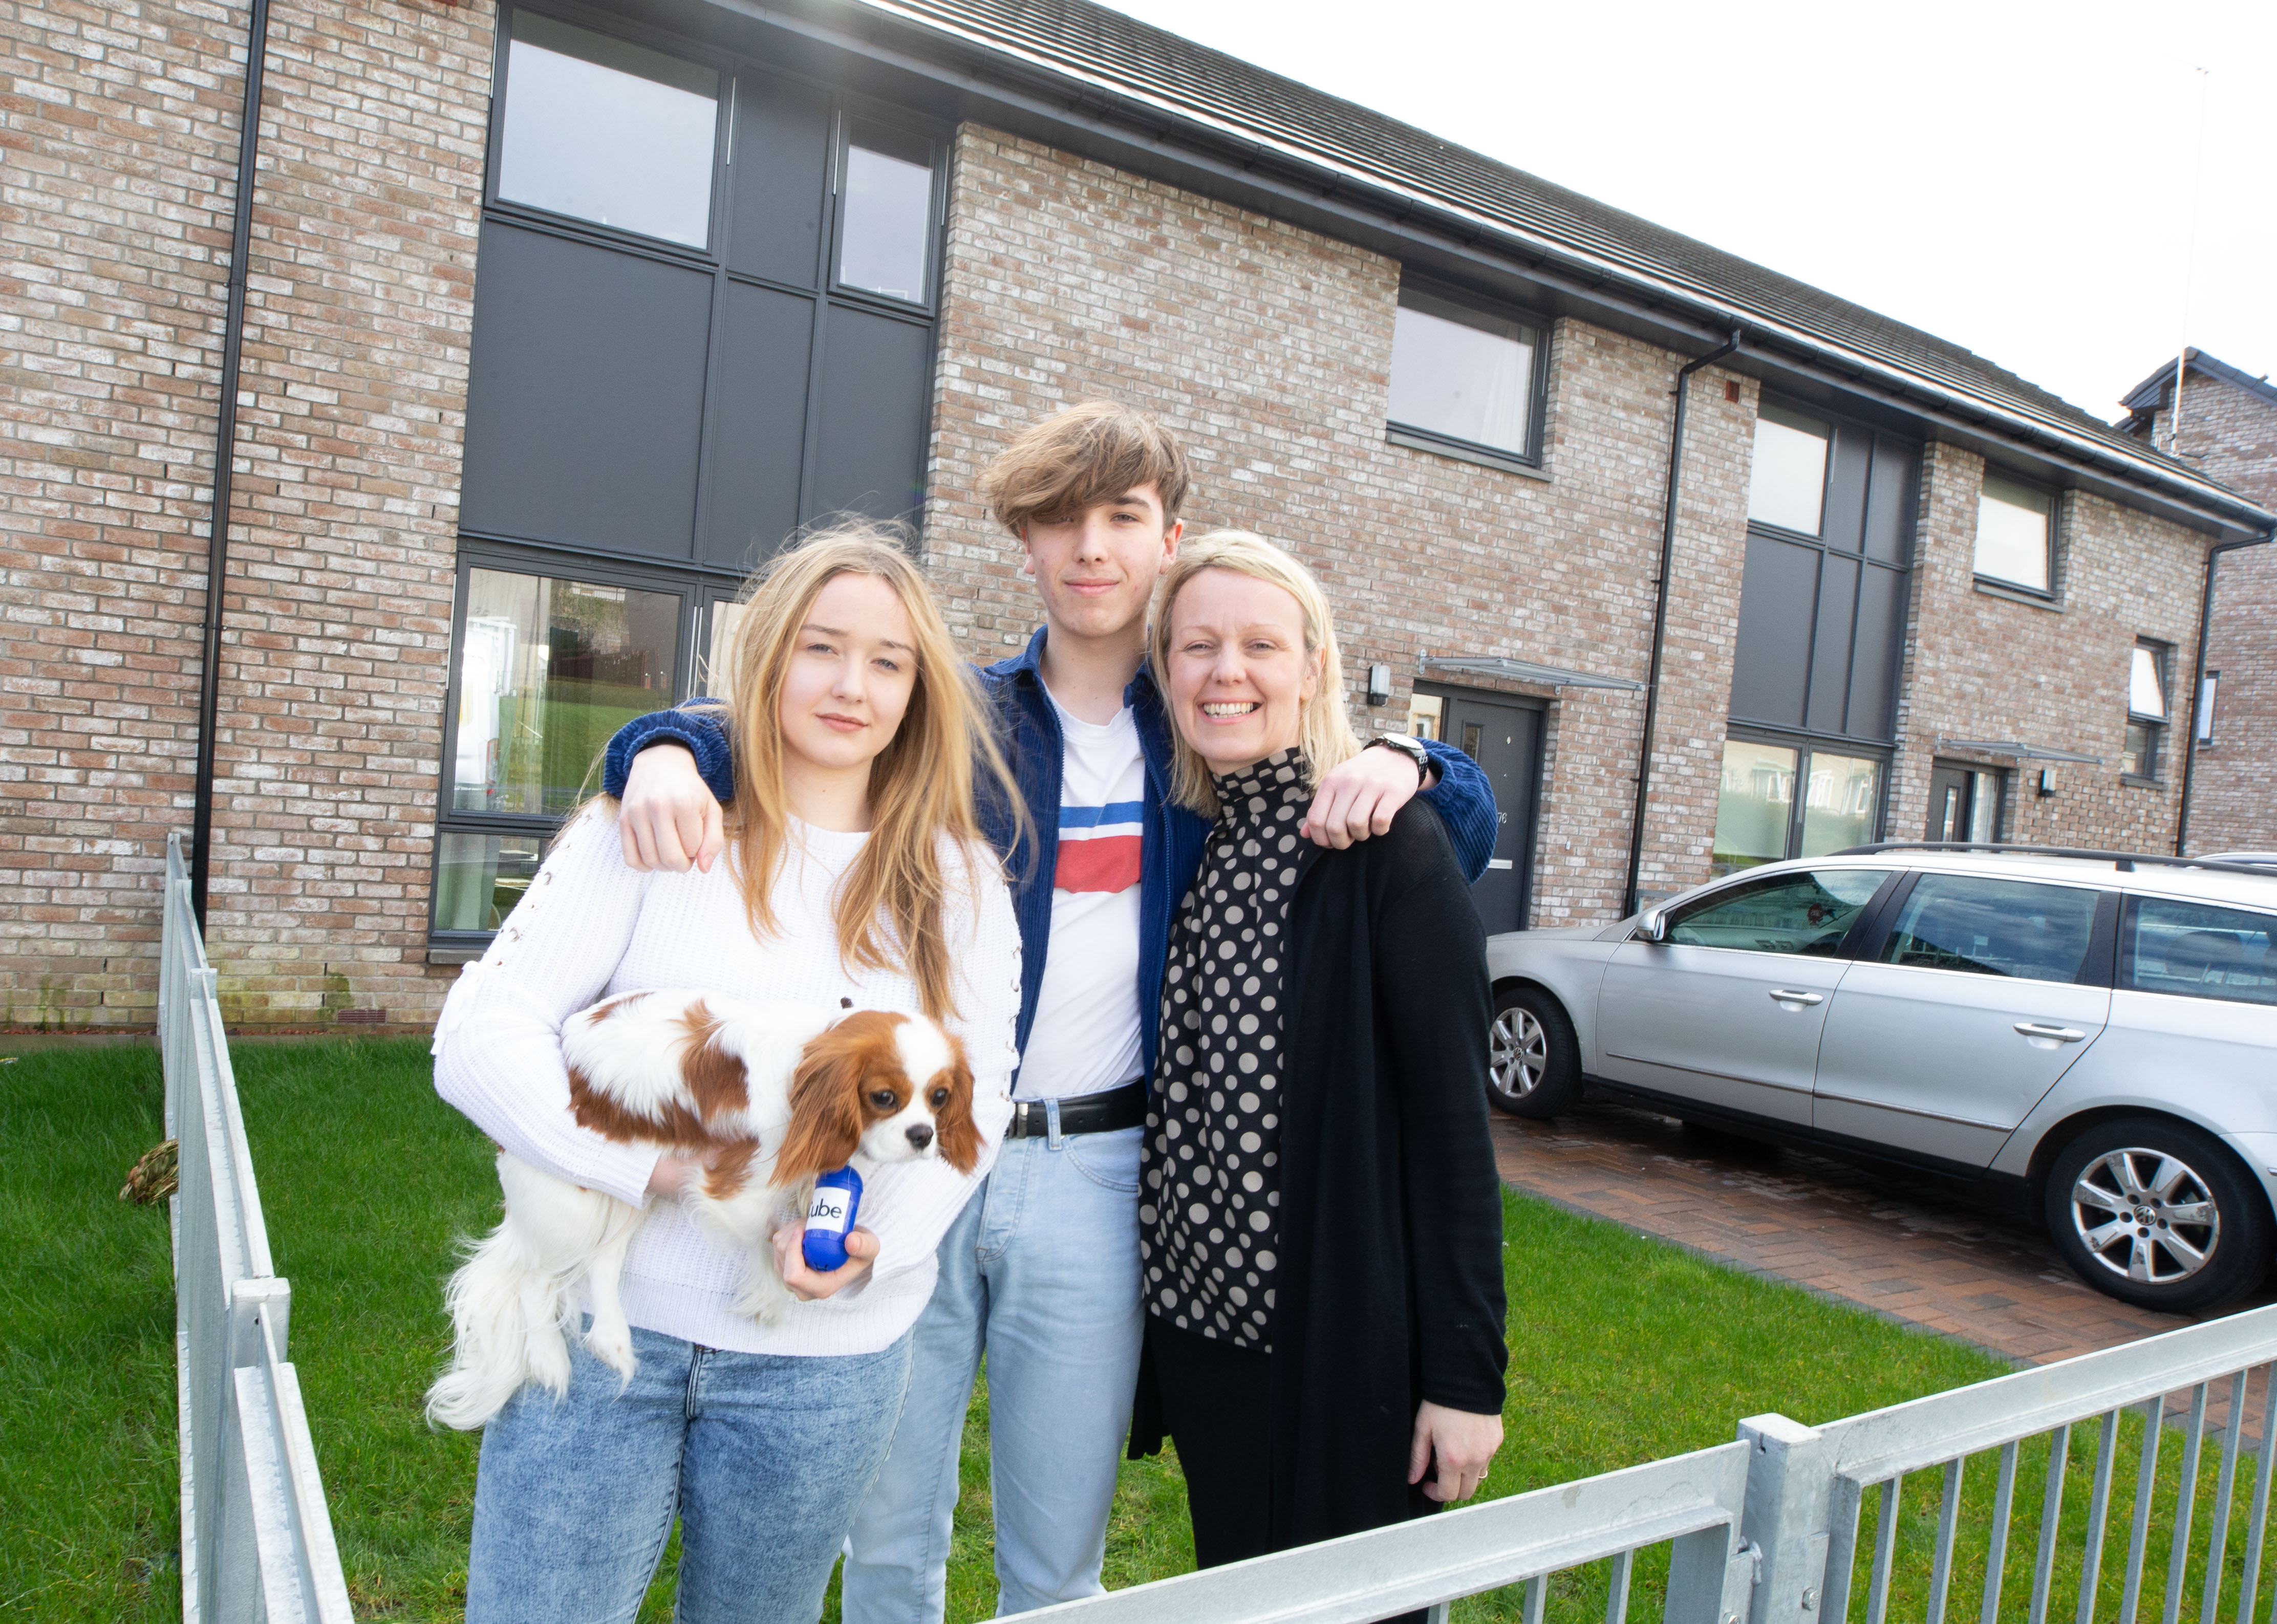 New Cube homes are toast of Dumbarton community